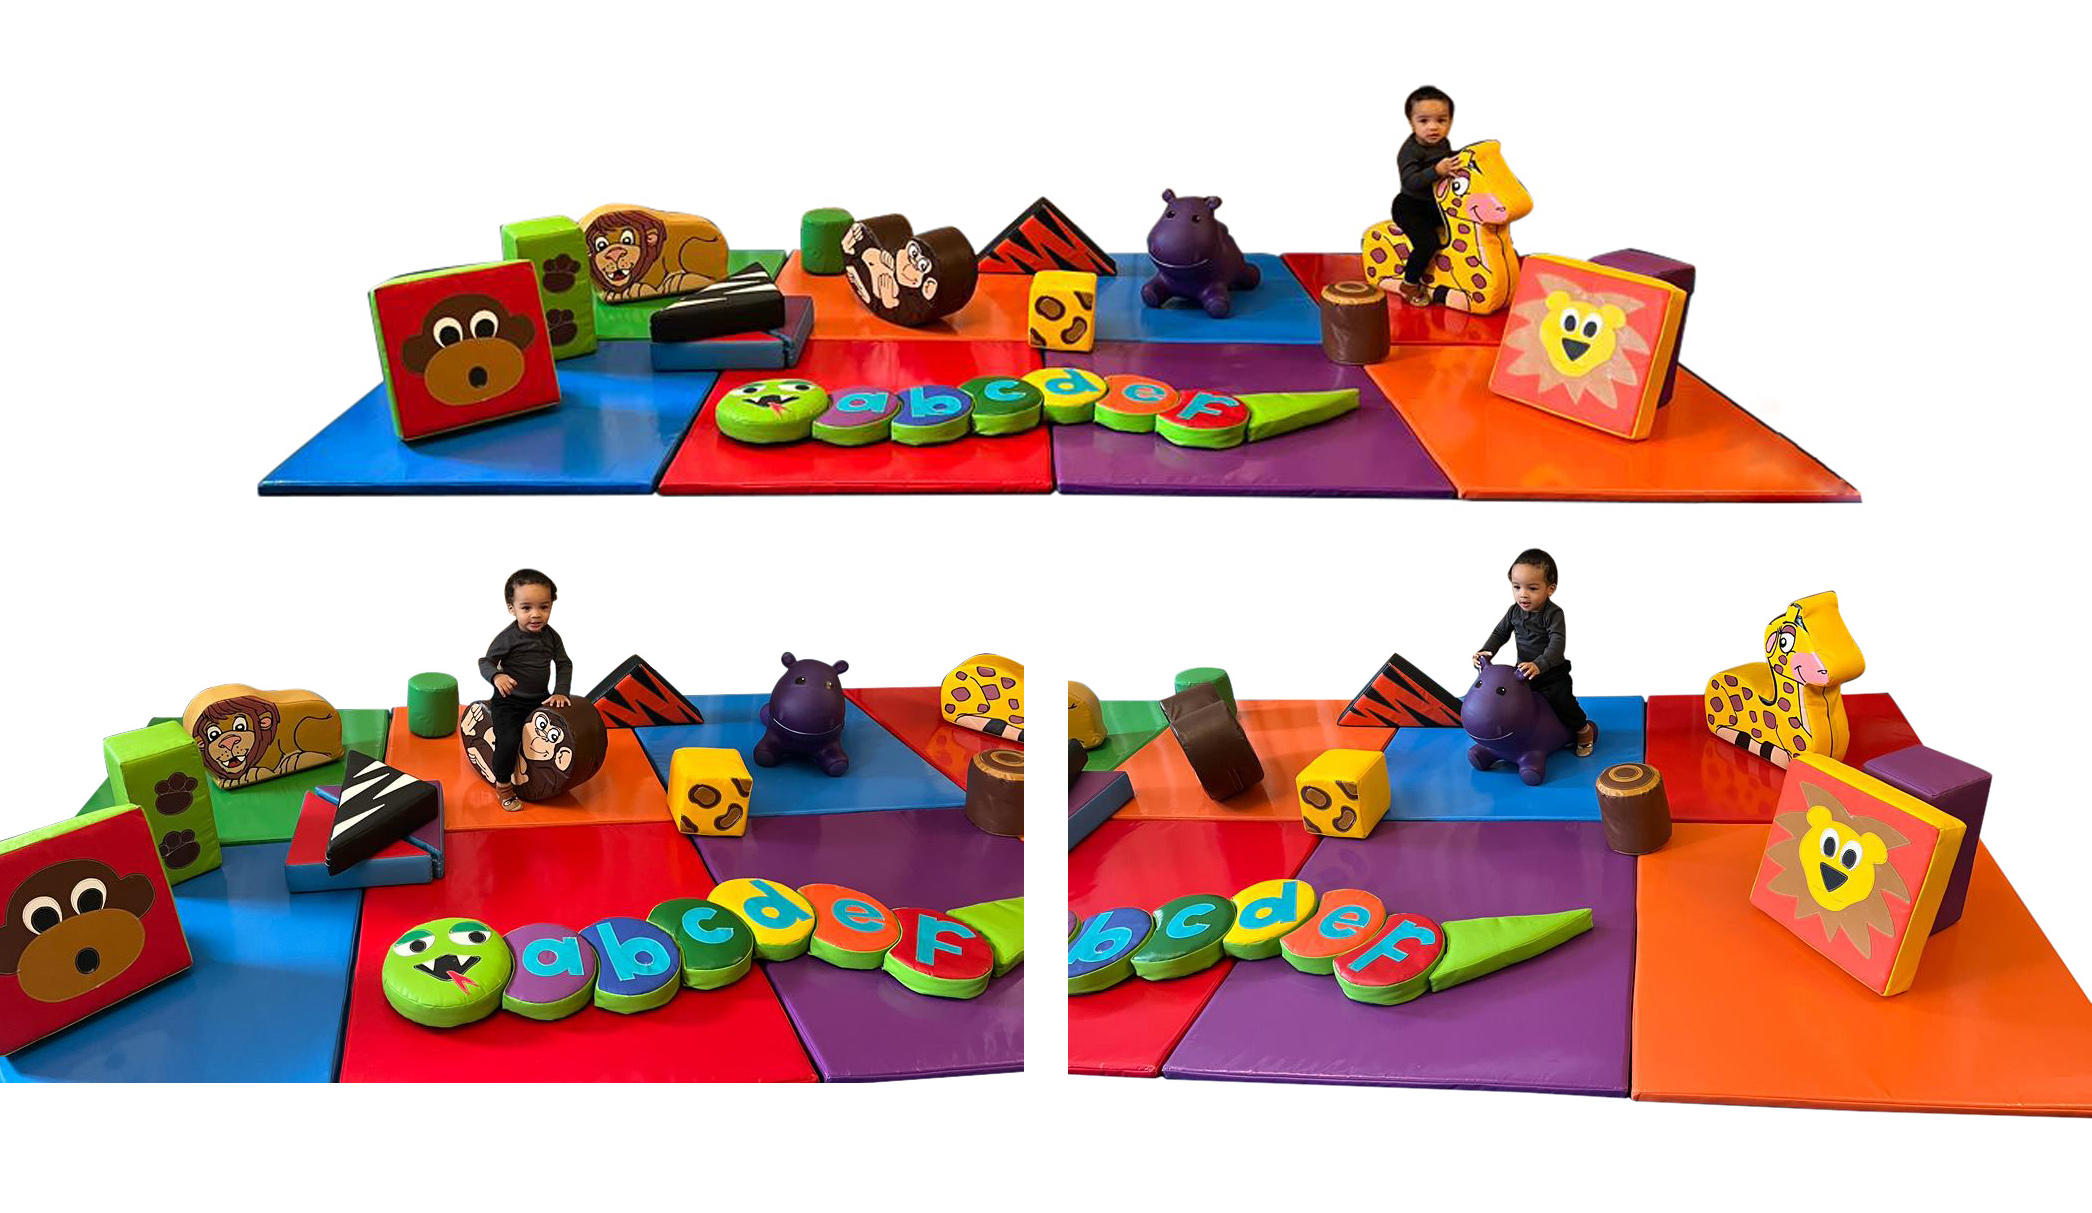 Jungle Soft Play Package